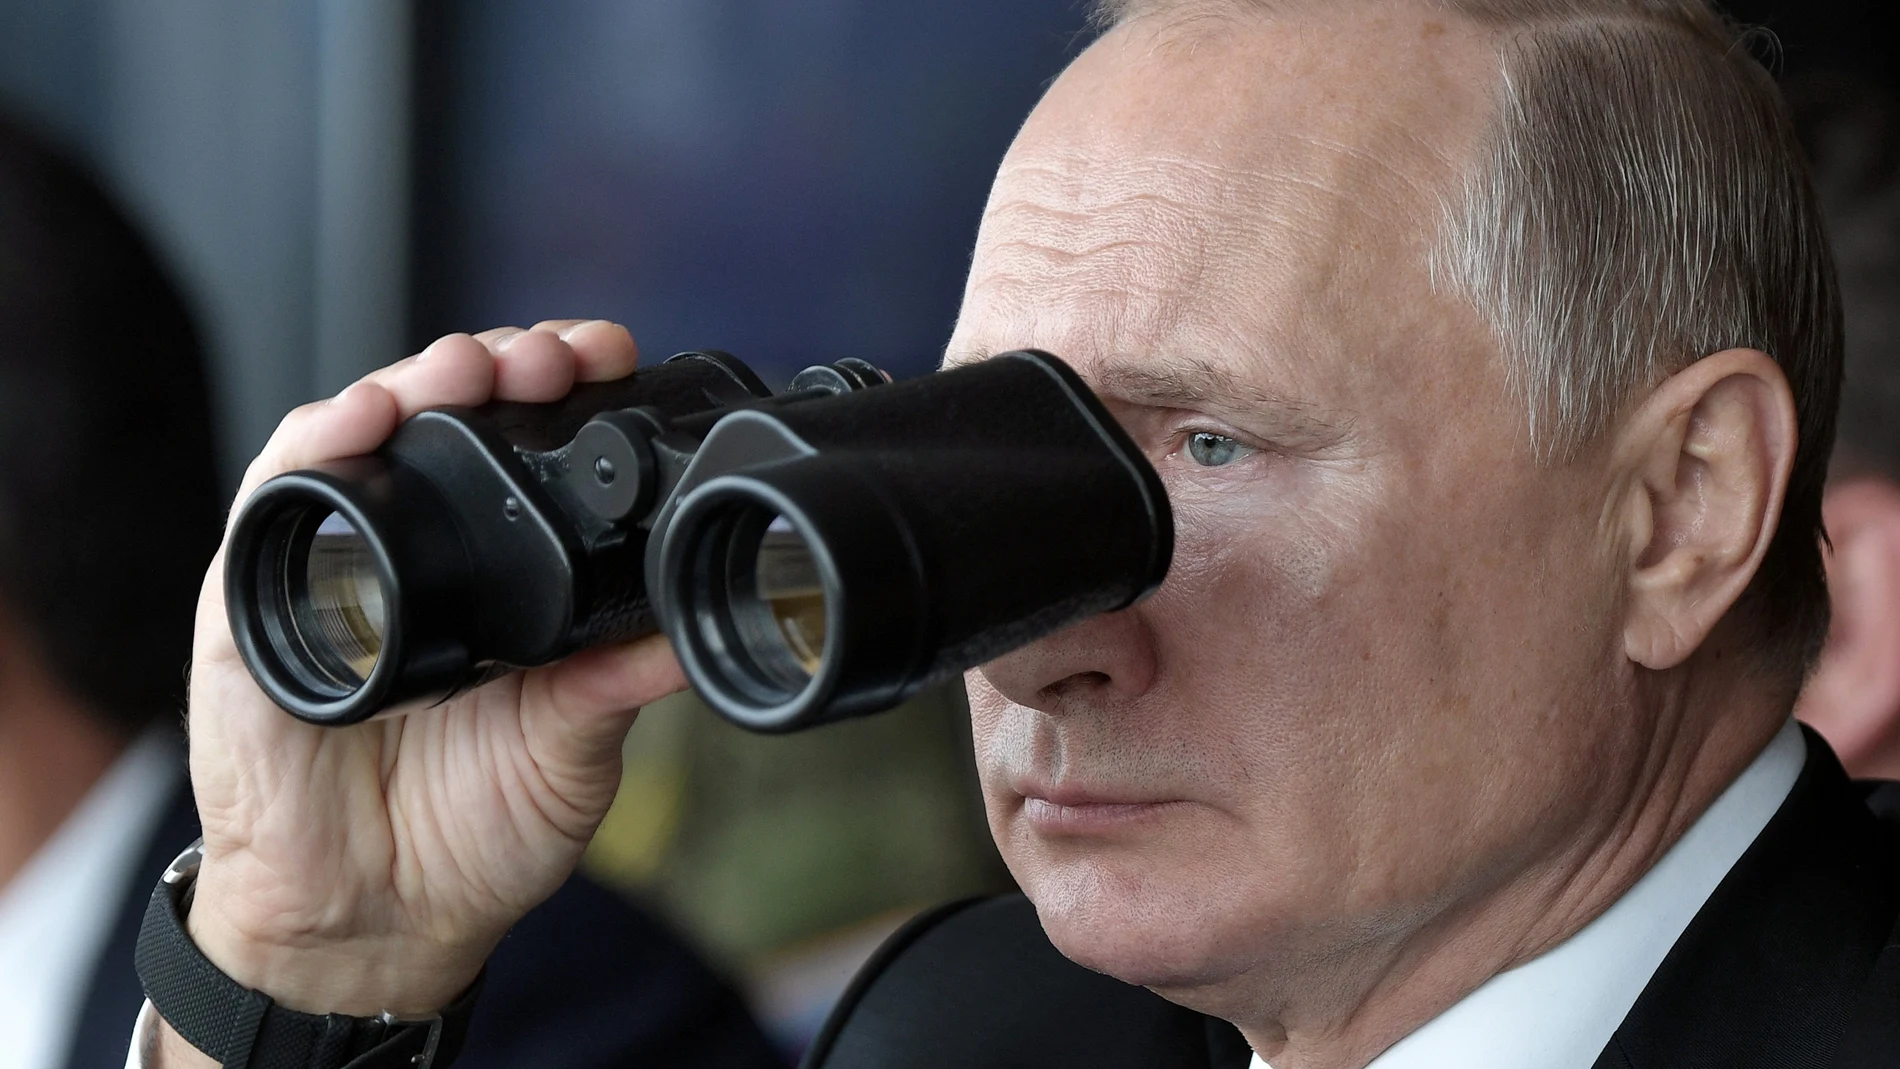 FILE - Russian President Vladimir Putin holds binoculars while watching the military exercises Center-2019 at Donguz shooting range near Orenburg, Russia, on Sept. 20, 2019. Russia's present demands are based on Putin's purported long sense of grievance and his rejection of Ukraine and Belarus as truly separate, sovereign countries but rather as part of a Russian linguistic and Orthodox motherland. (Alexei Nikolsky, Sputnik, Kremlin Pool Photo via AP, File)